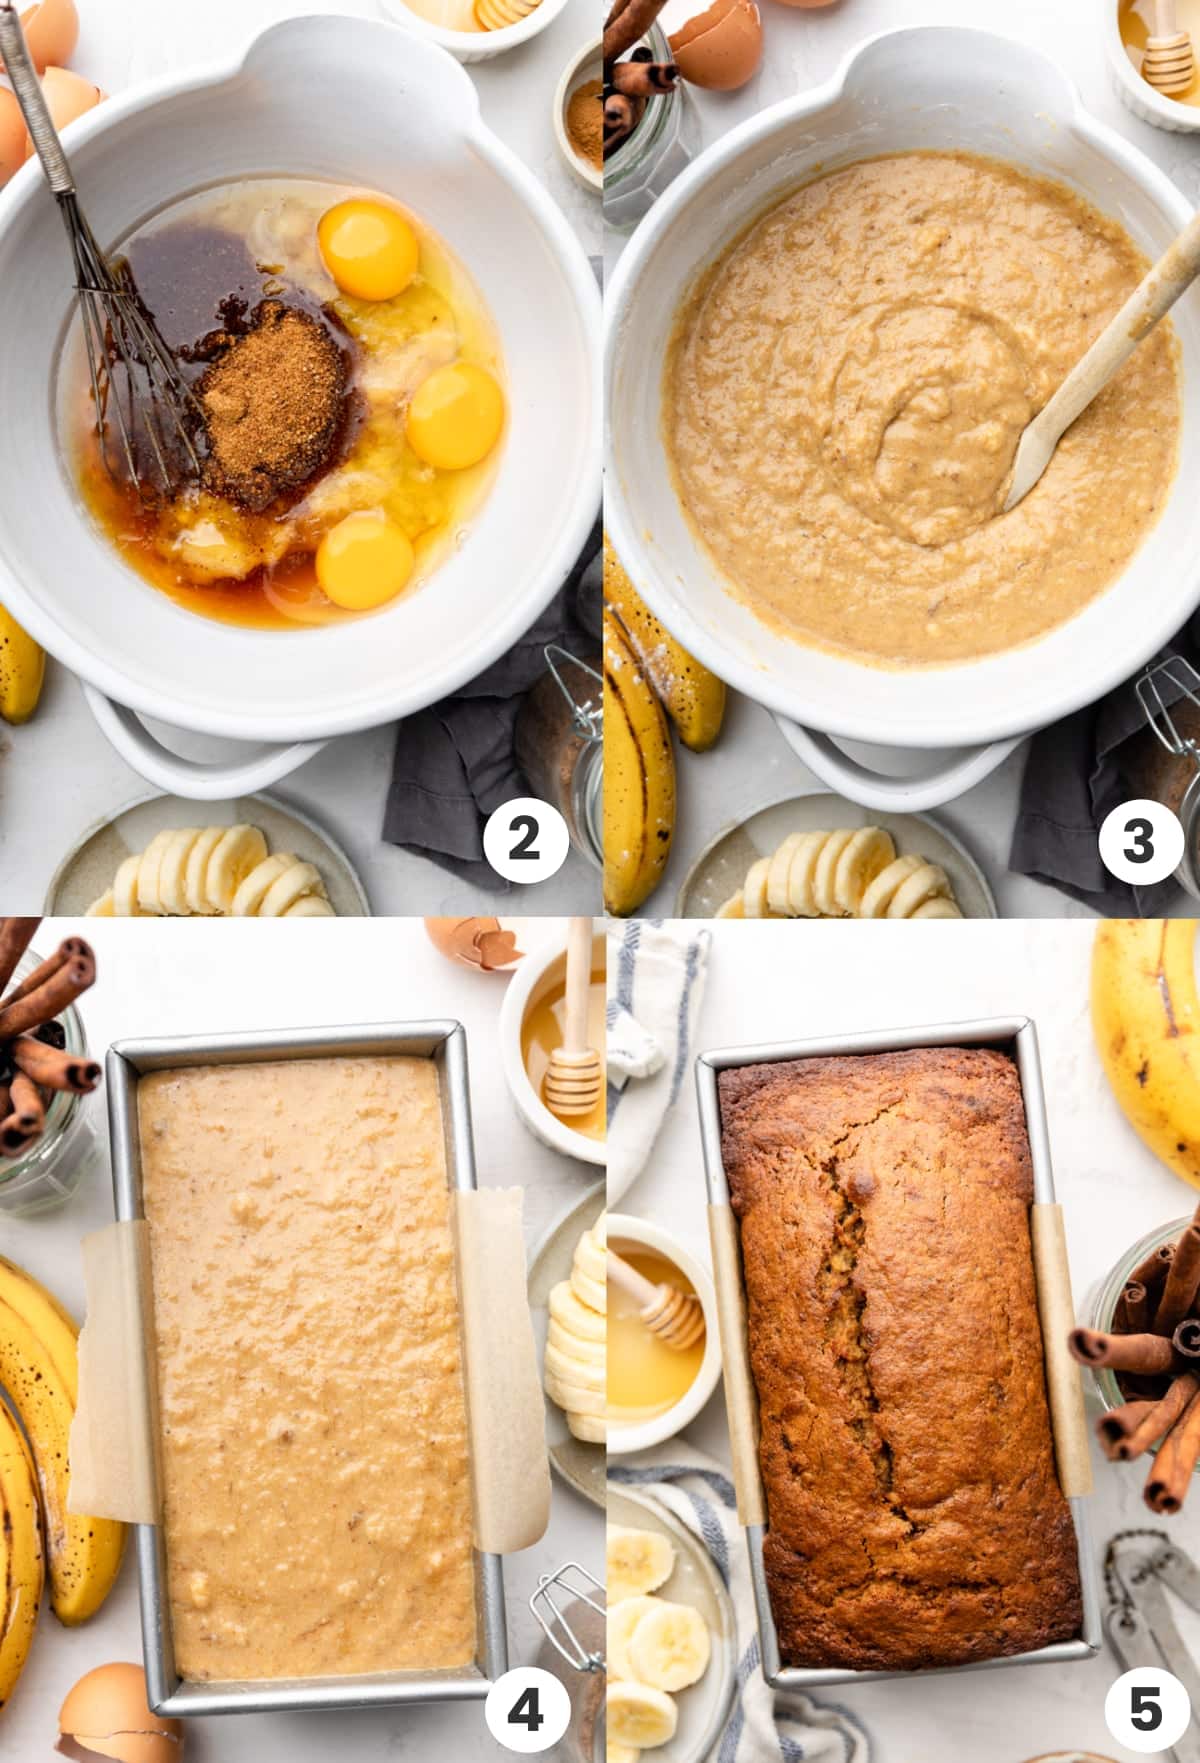 steps for how to make paleo banana bread, including whisking the wet ingredients, mixing up the batter, transferring it into the pan, and baking it.